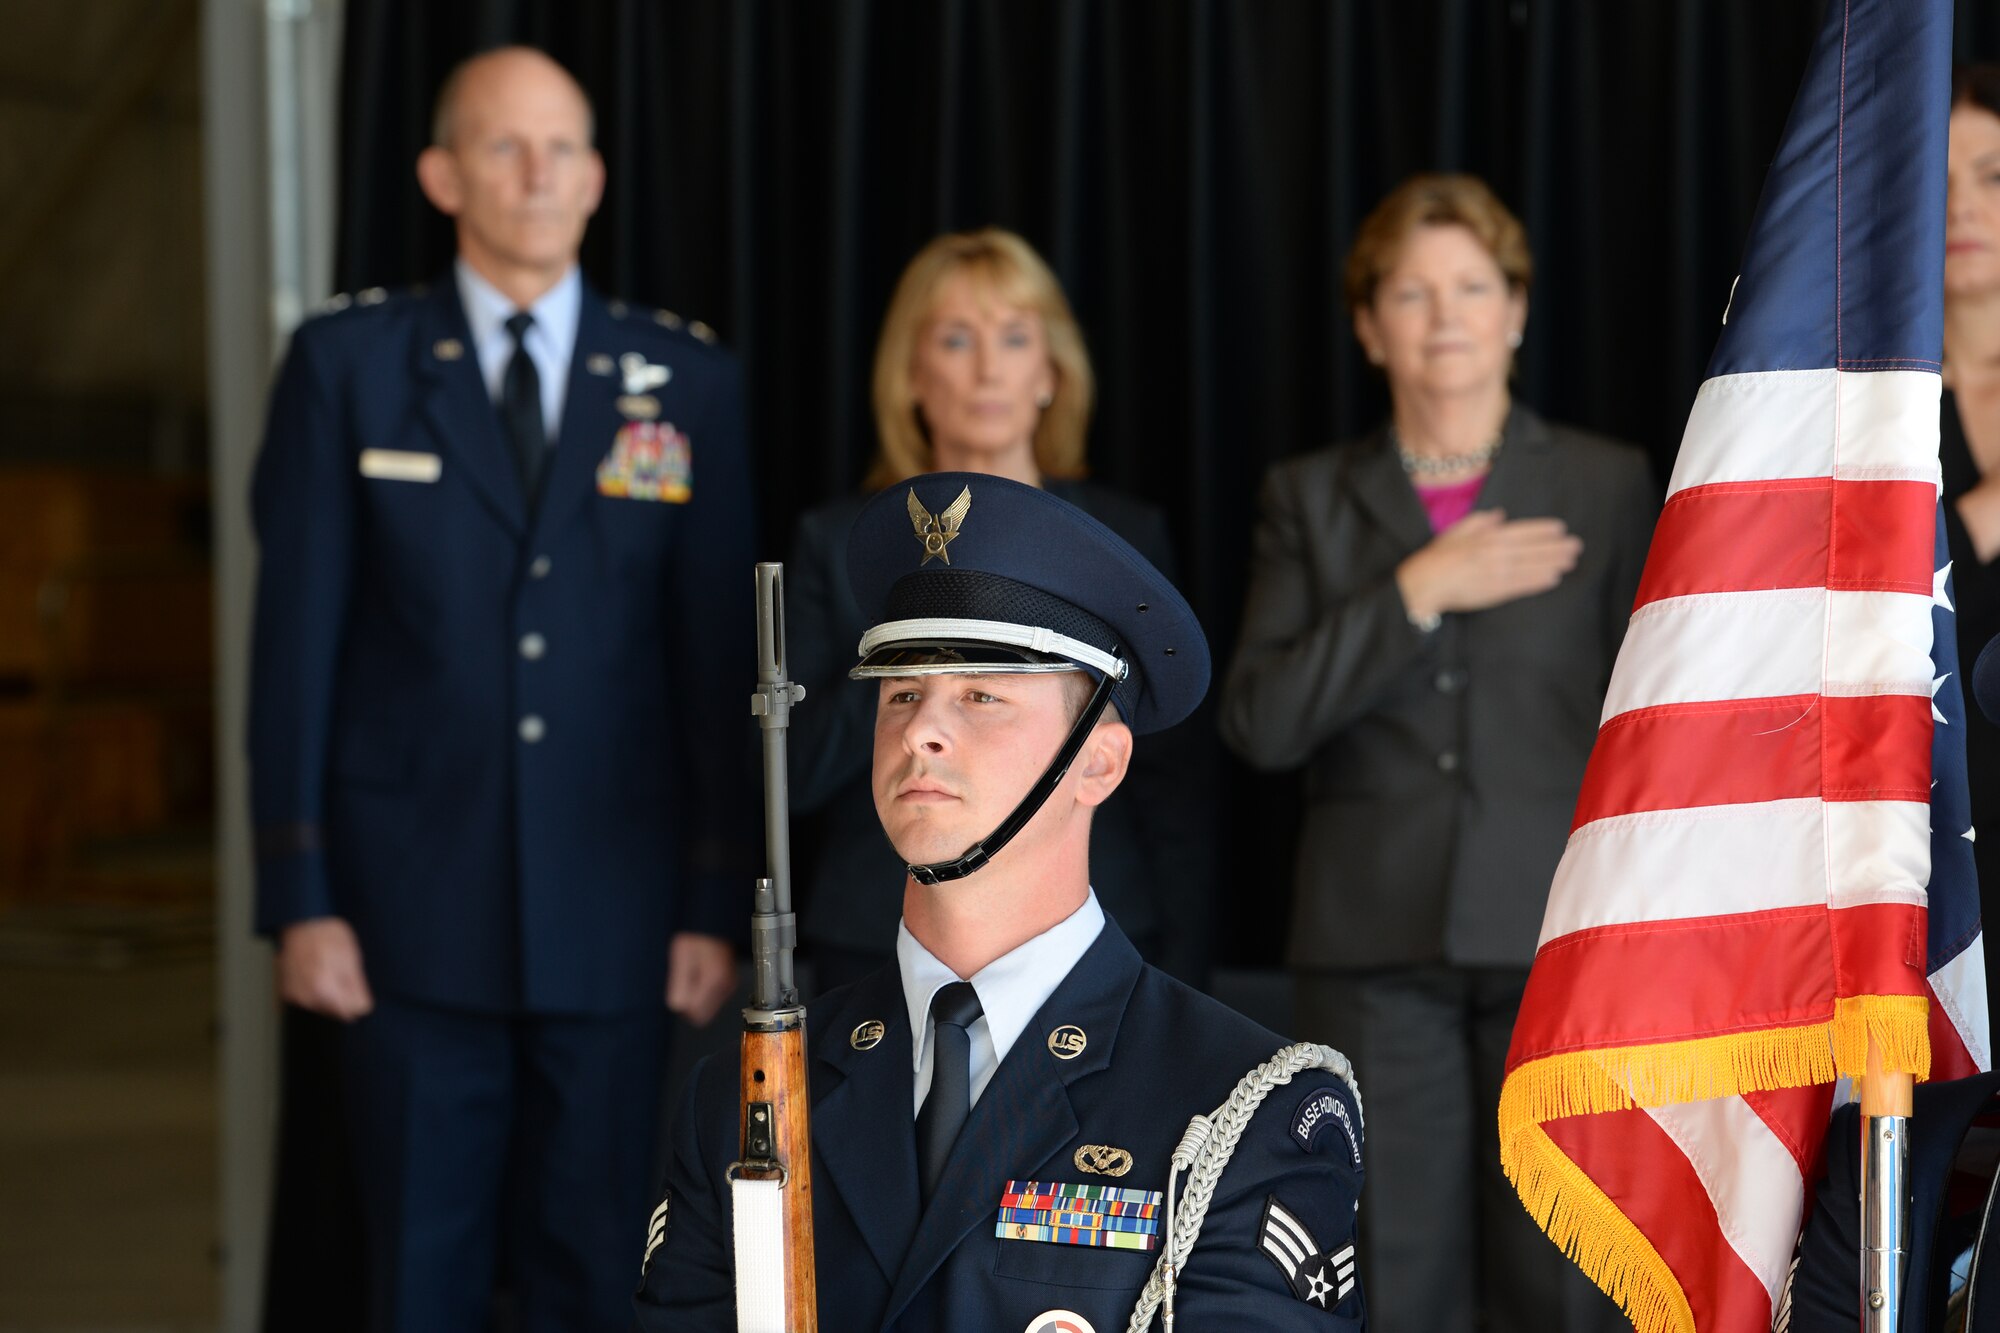 An Airman from the 157th Air Refueling Wing stands at attention during the hangar expansion groundbreaking ceremony, Pease Air National Guard Base, N.H., Sept. 18, 2015. (U.S. Air National Guard photo by Staff Sgt. Curtis J. Lenz)